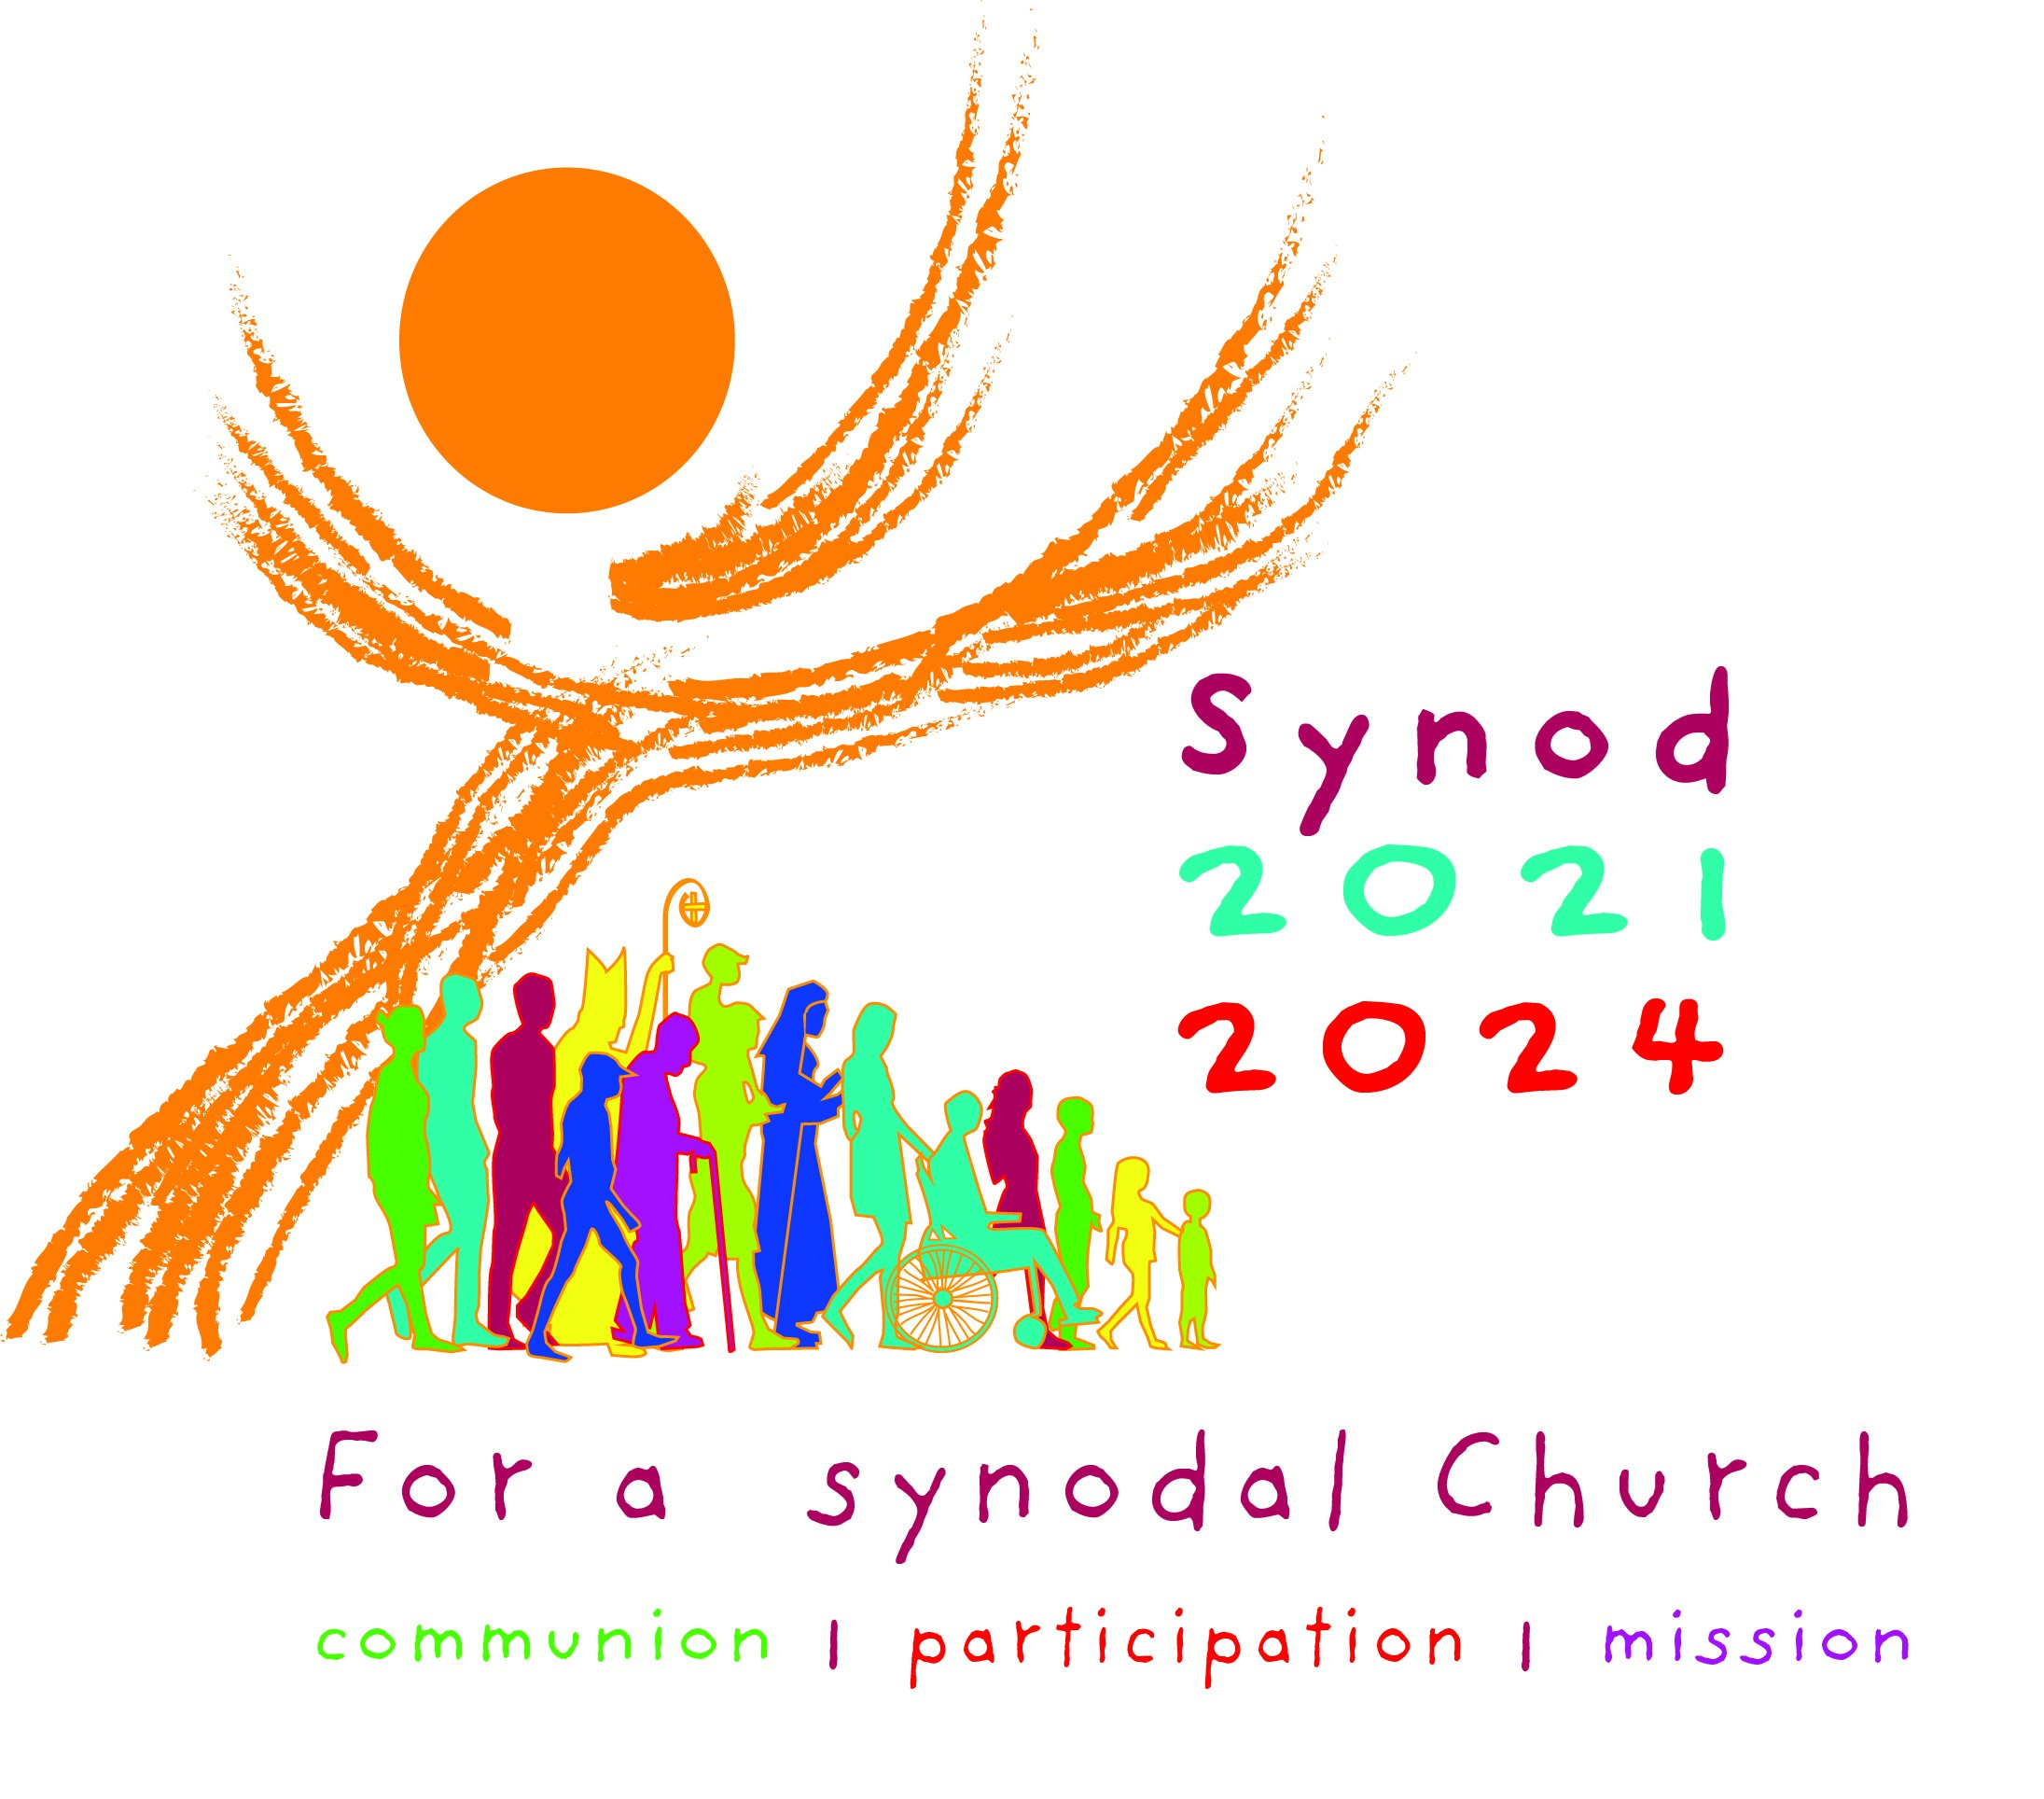 The official logo for the XVI Ordinary General Assembly of the Synod of Bishops.